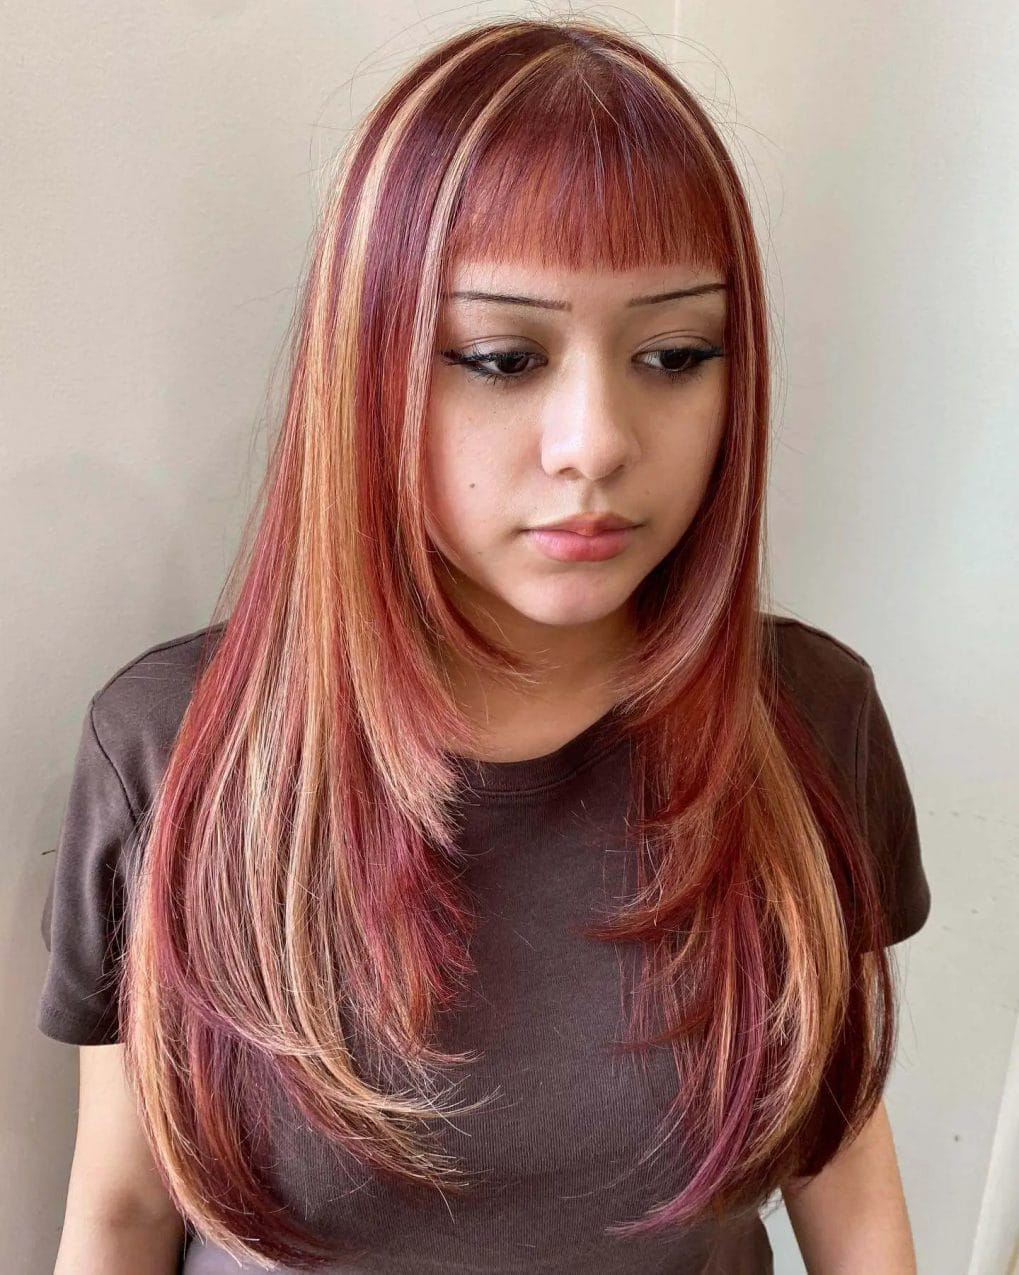 Fiery red and blonde highlights in straight, layered cut with full fringe.